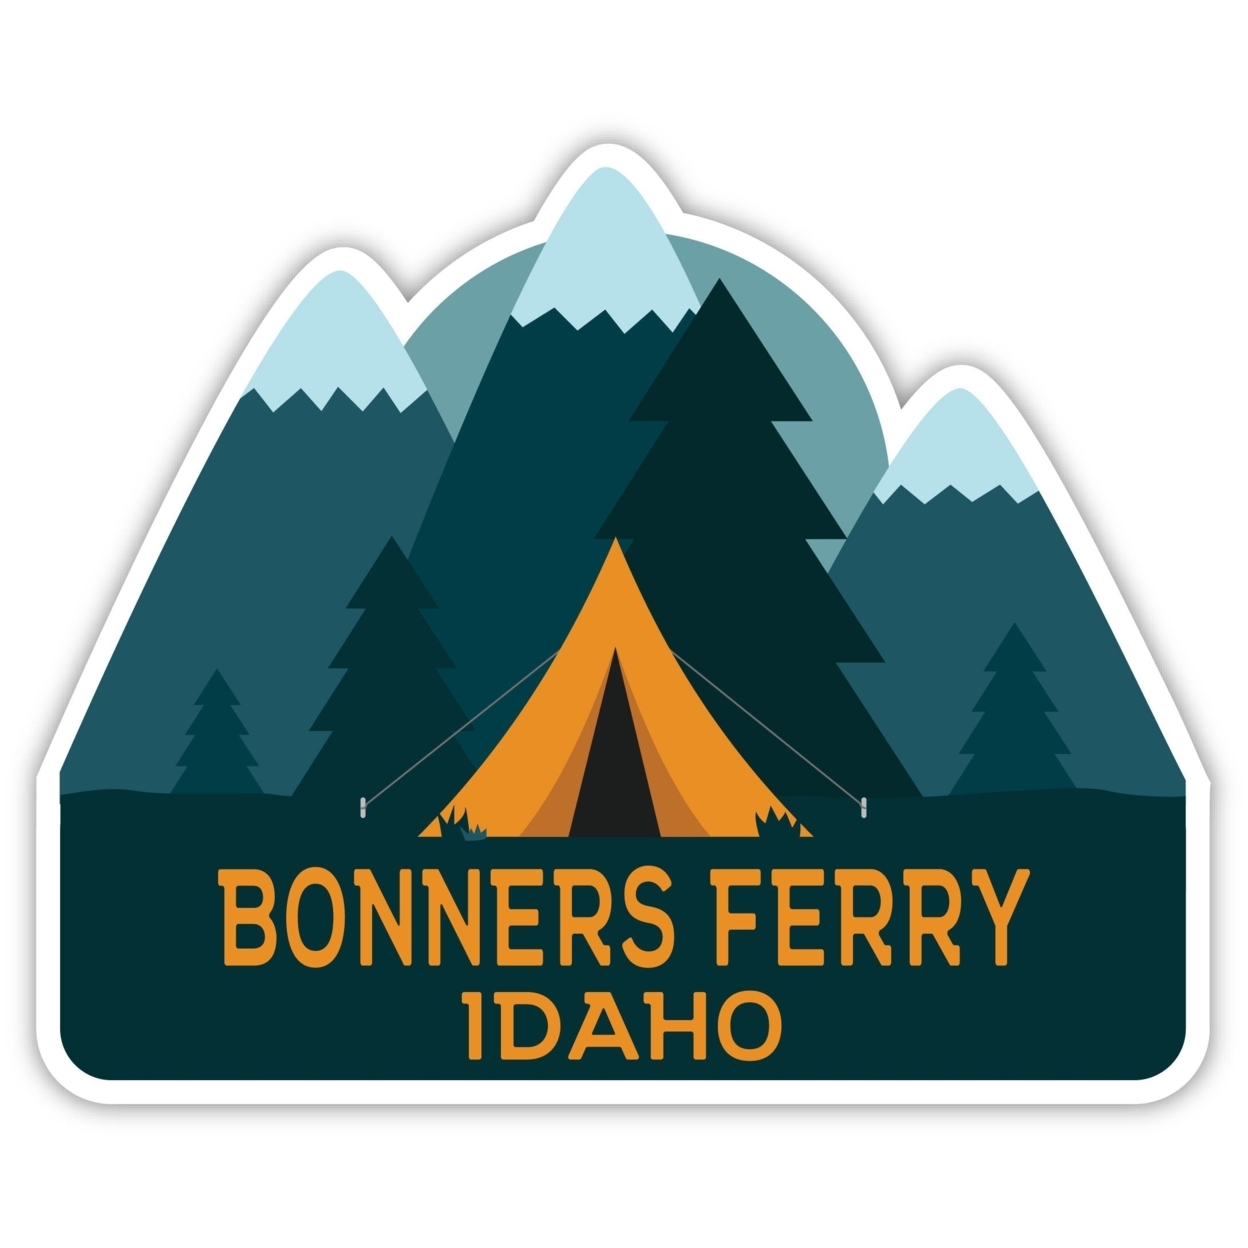 Bonners Ferry Idaho Souvenir Decorative Stickers (Choose Theme And Size) - 4-Pack, 4-Inch, Adventures Awaits